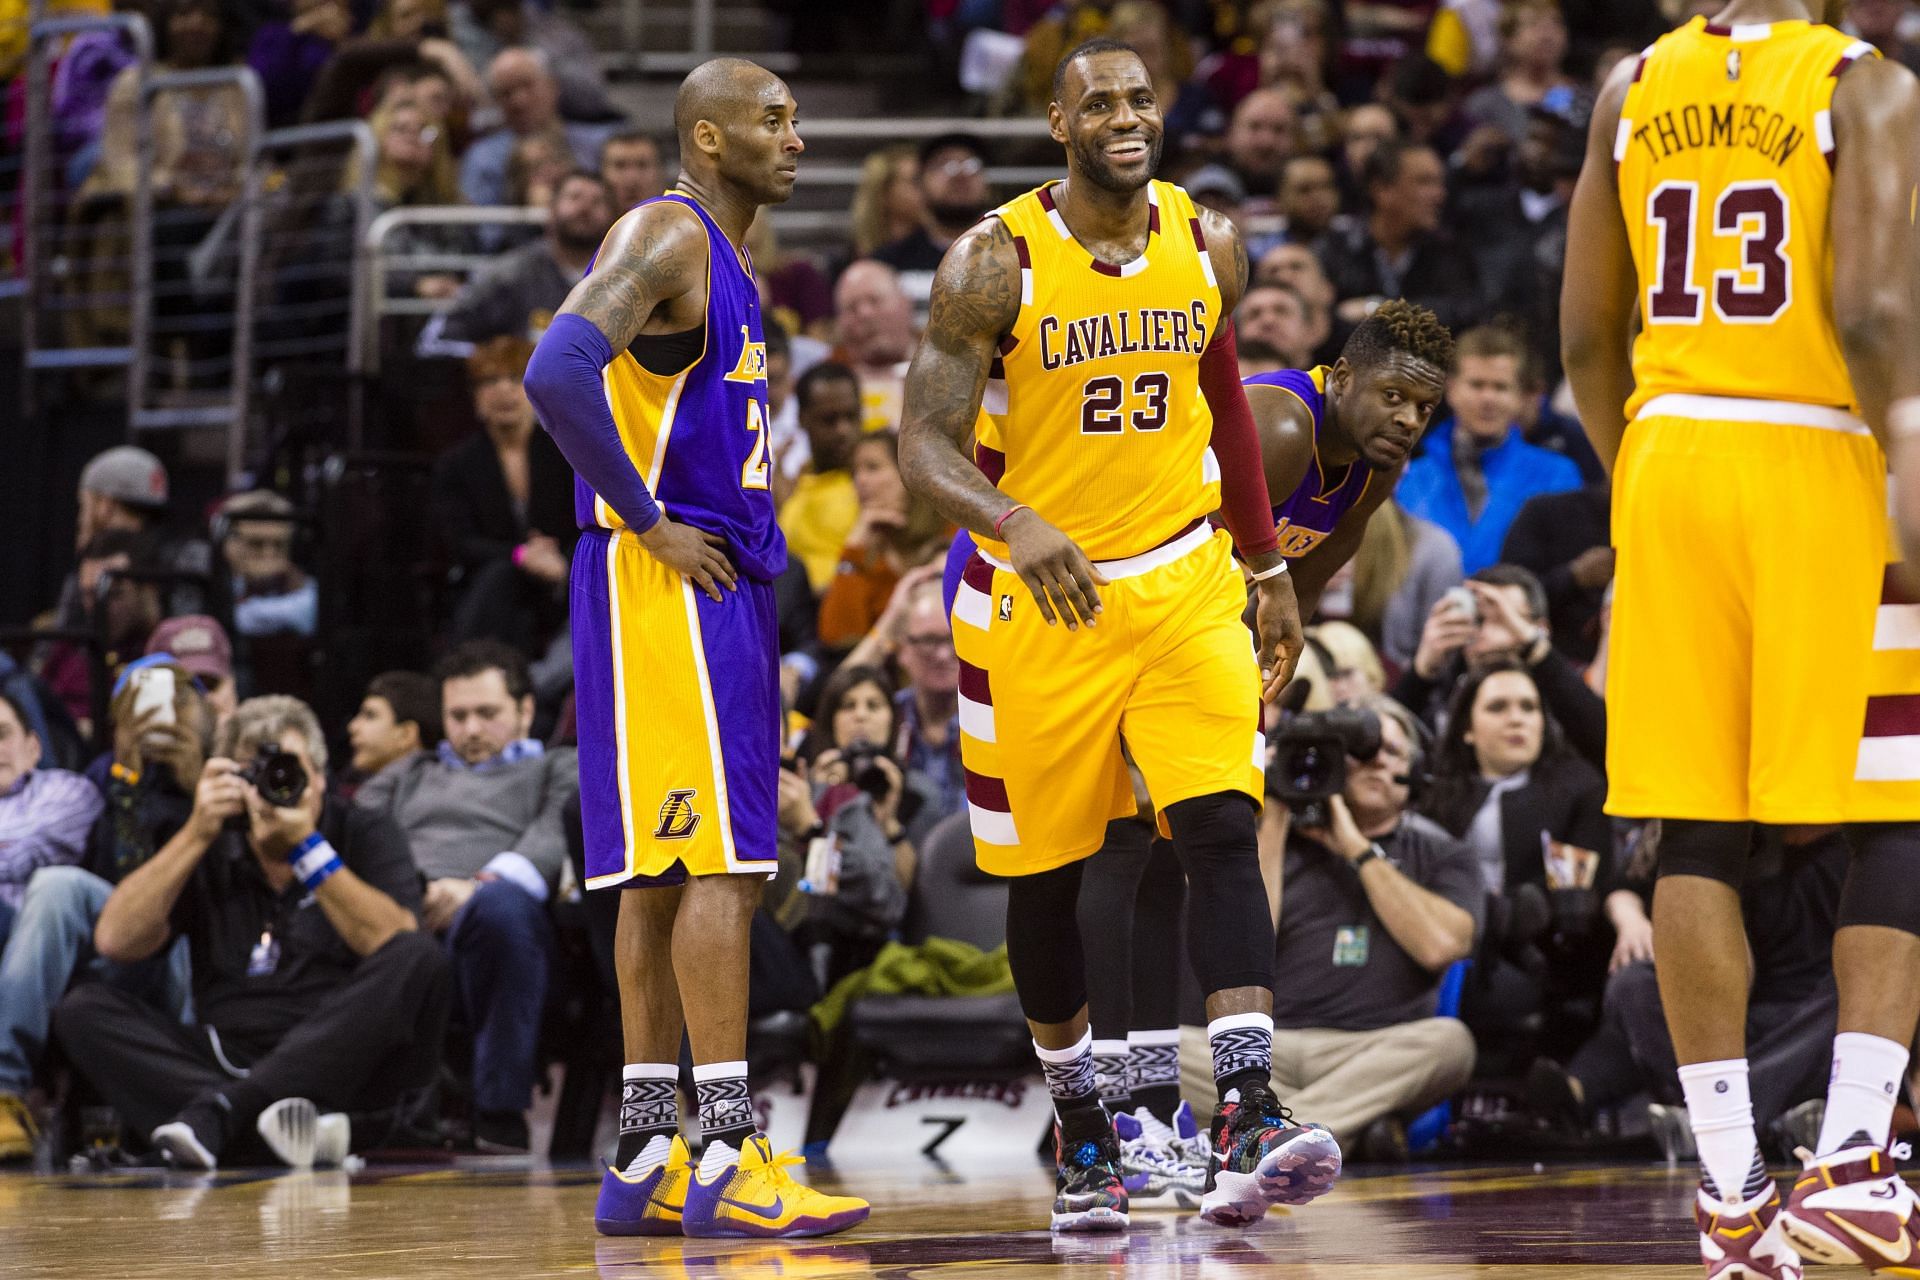 Kobe Bryant and LeBron James in NBA action